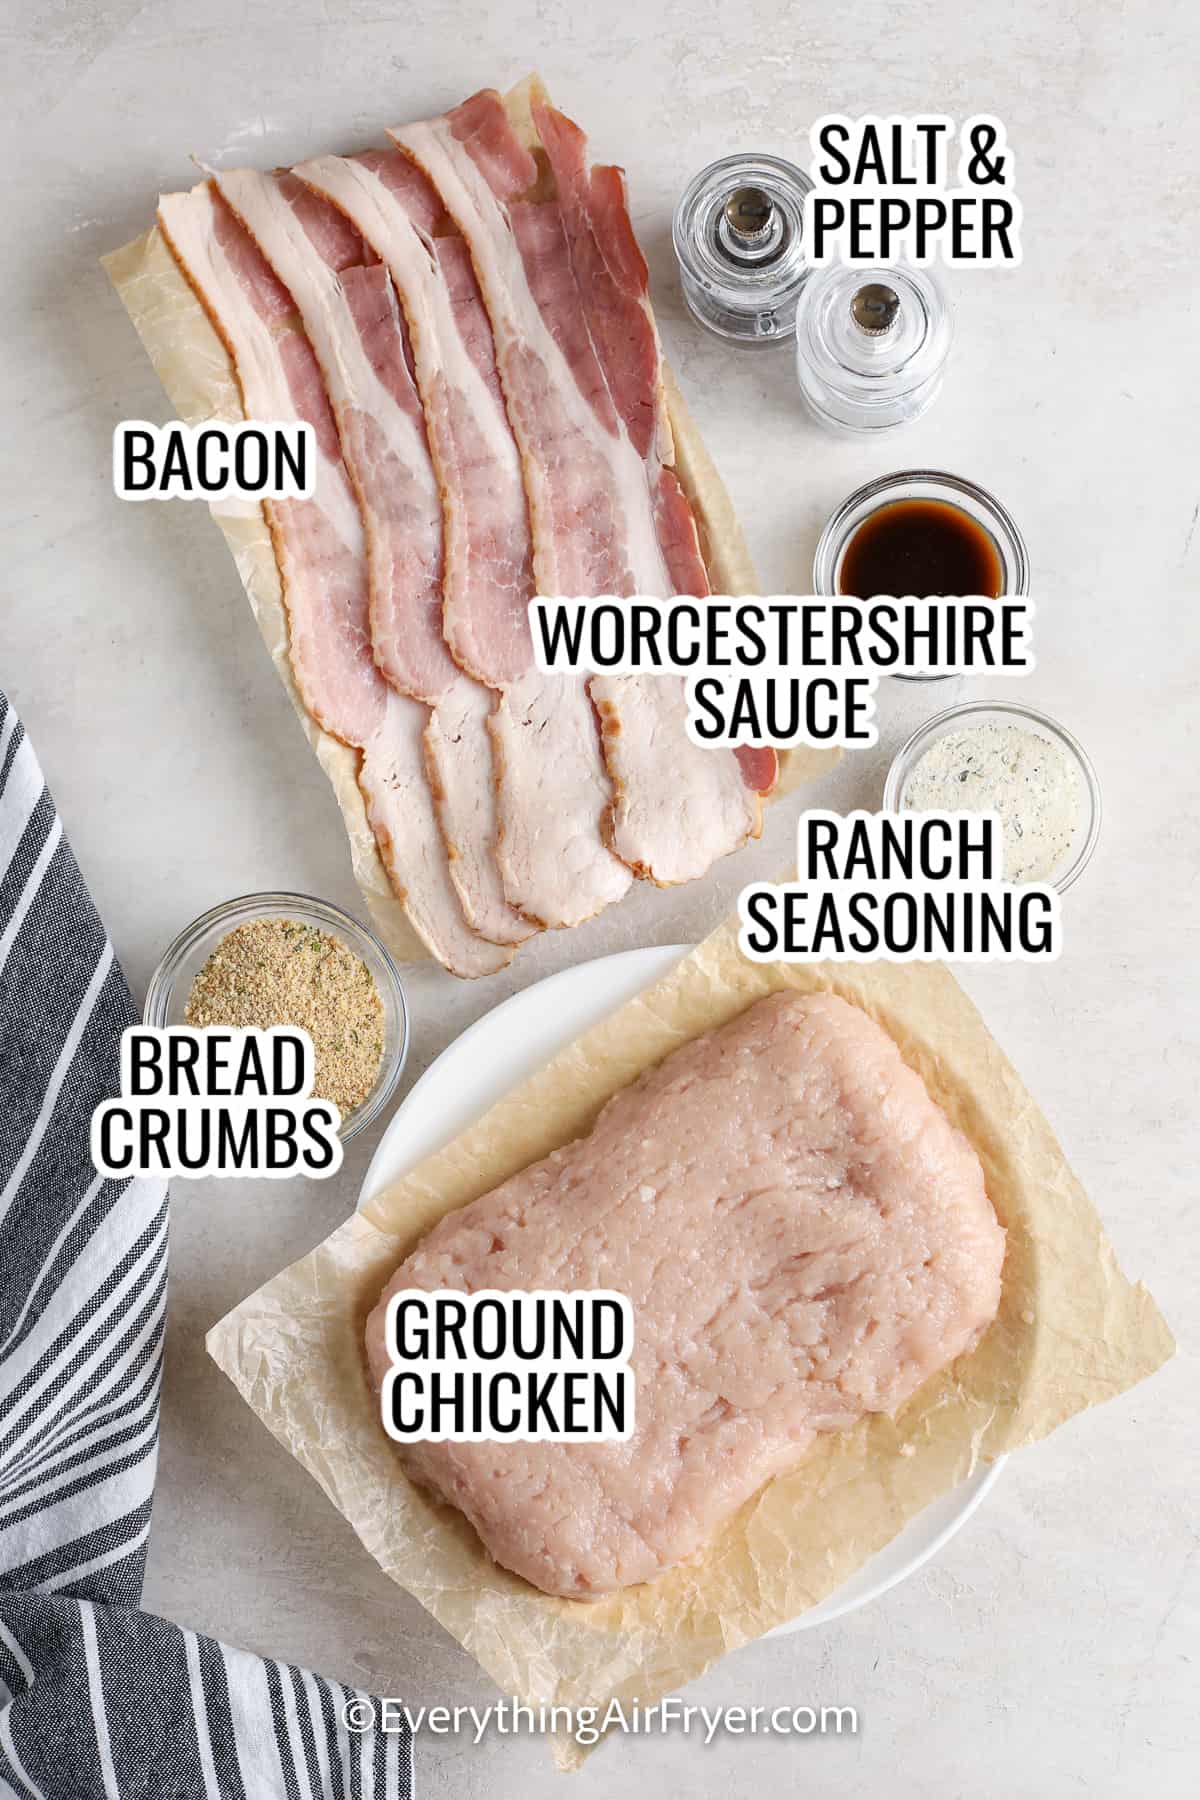 ingredient assembled to make air fryer chicken burgers, including bacon, ground chicken , bread crumbs, ranch seasoning, and worcestershitre sauce